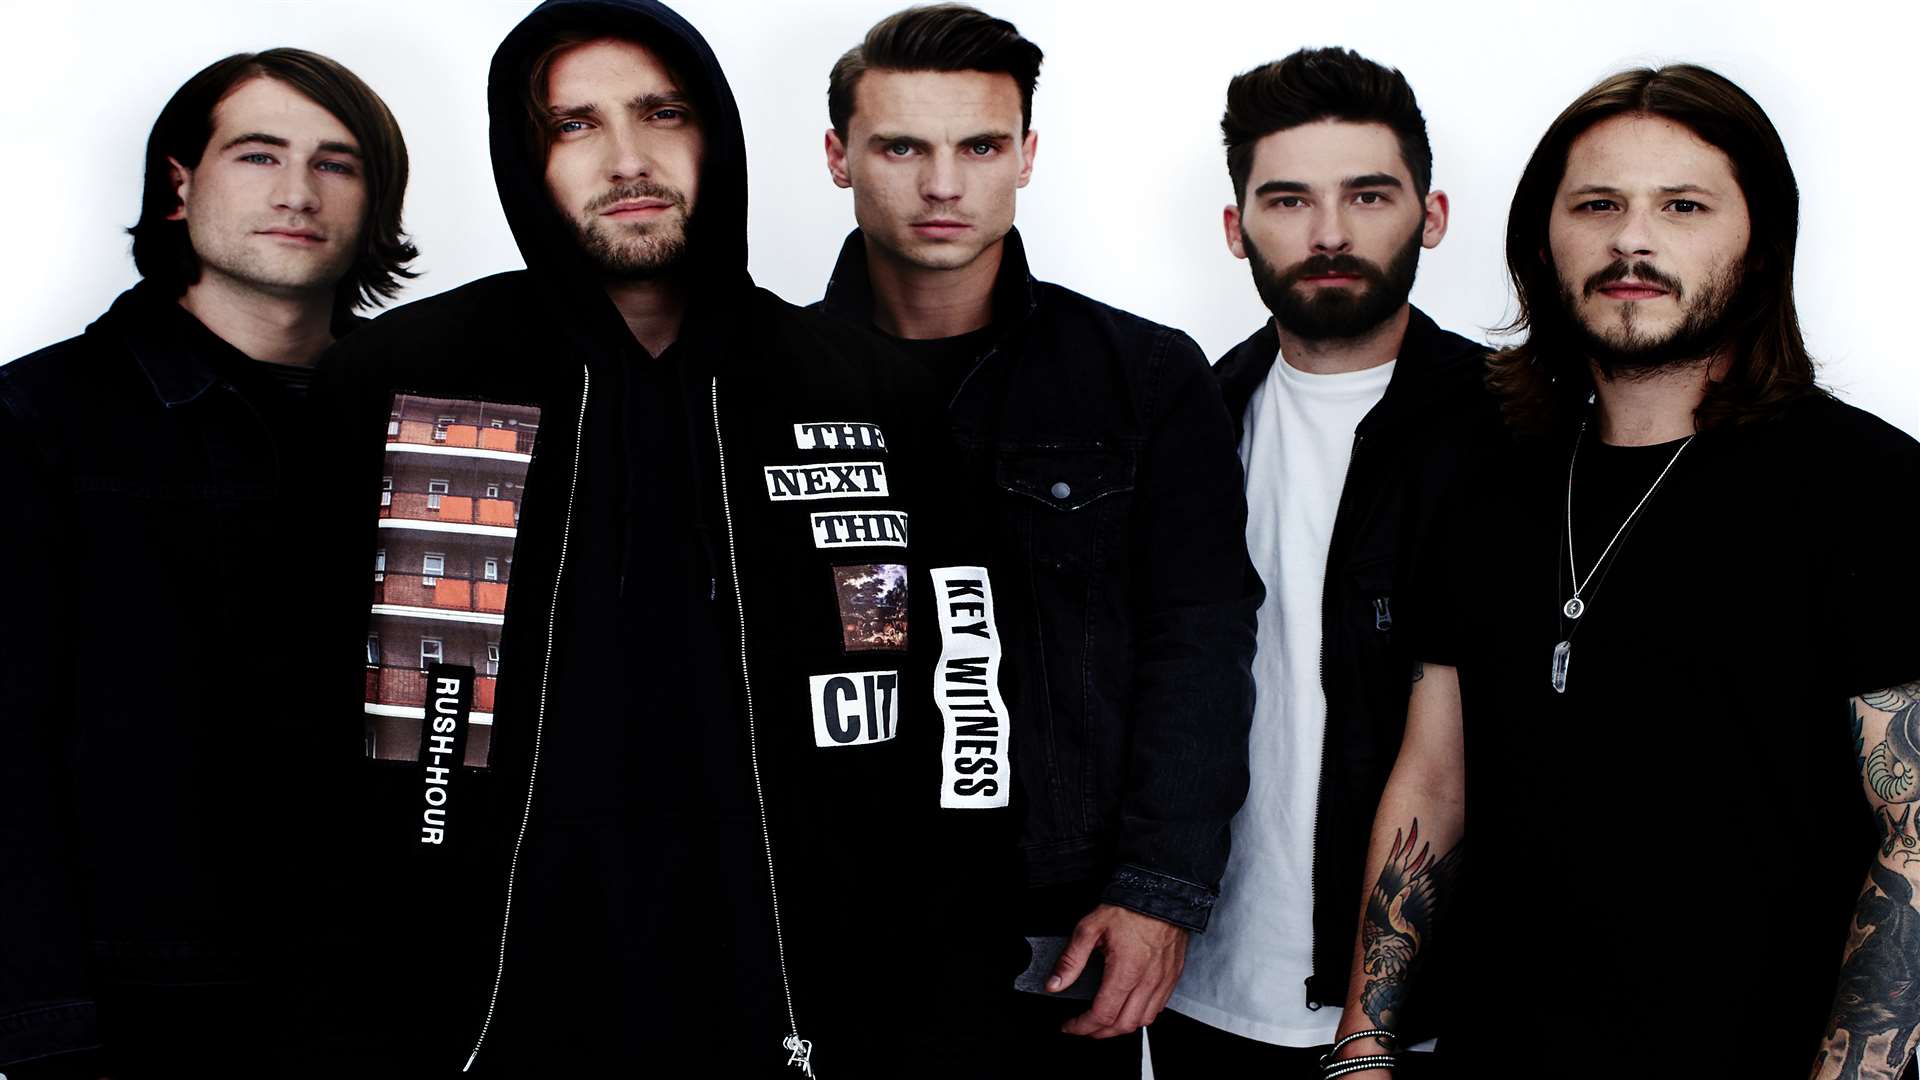 You Me At Six will be playing one concert in Kent